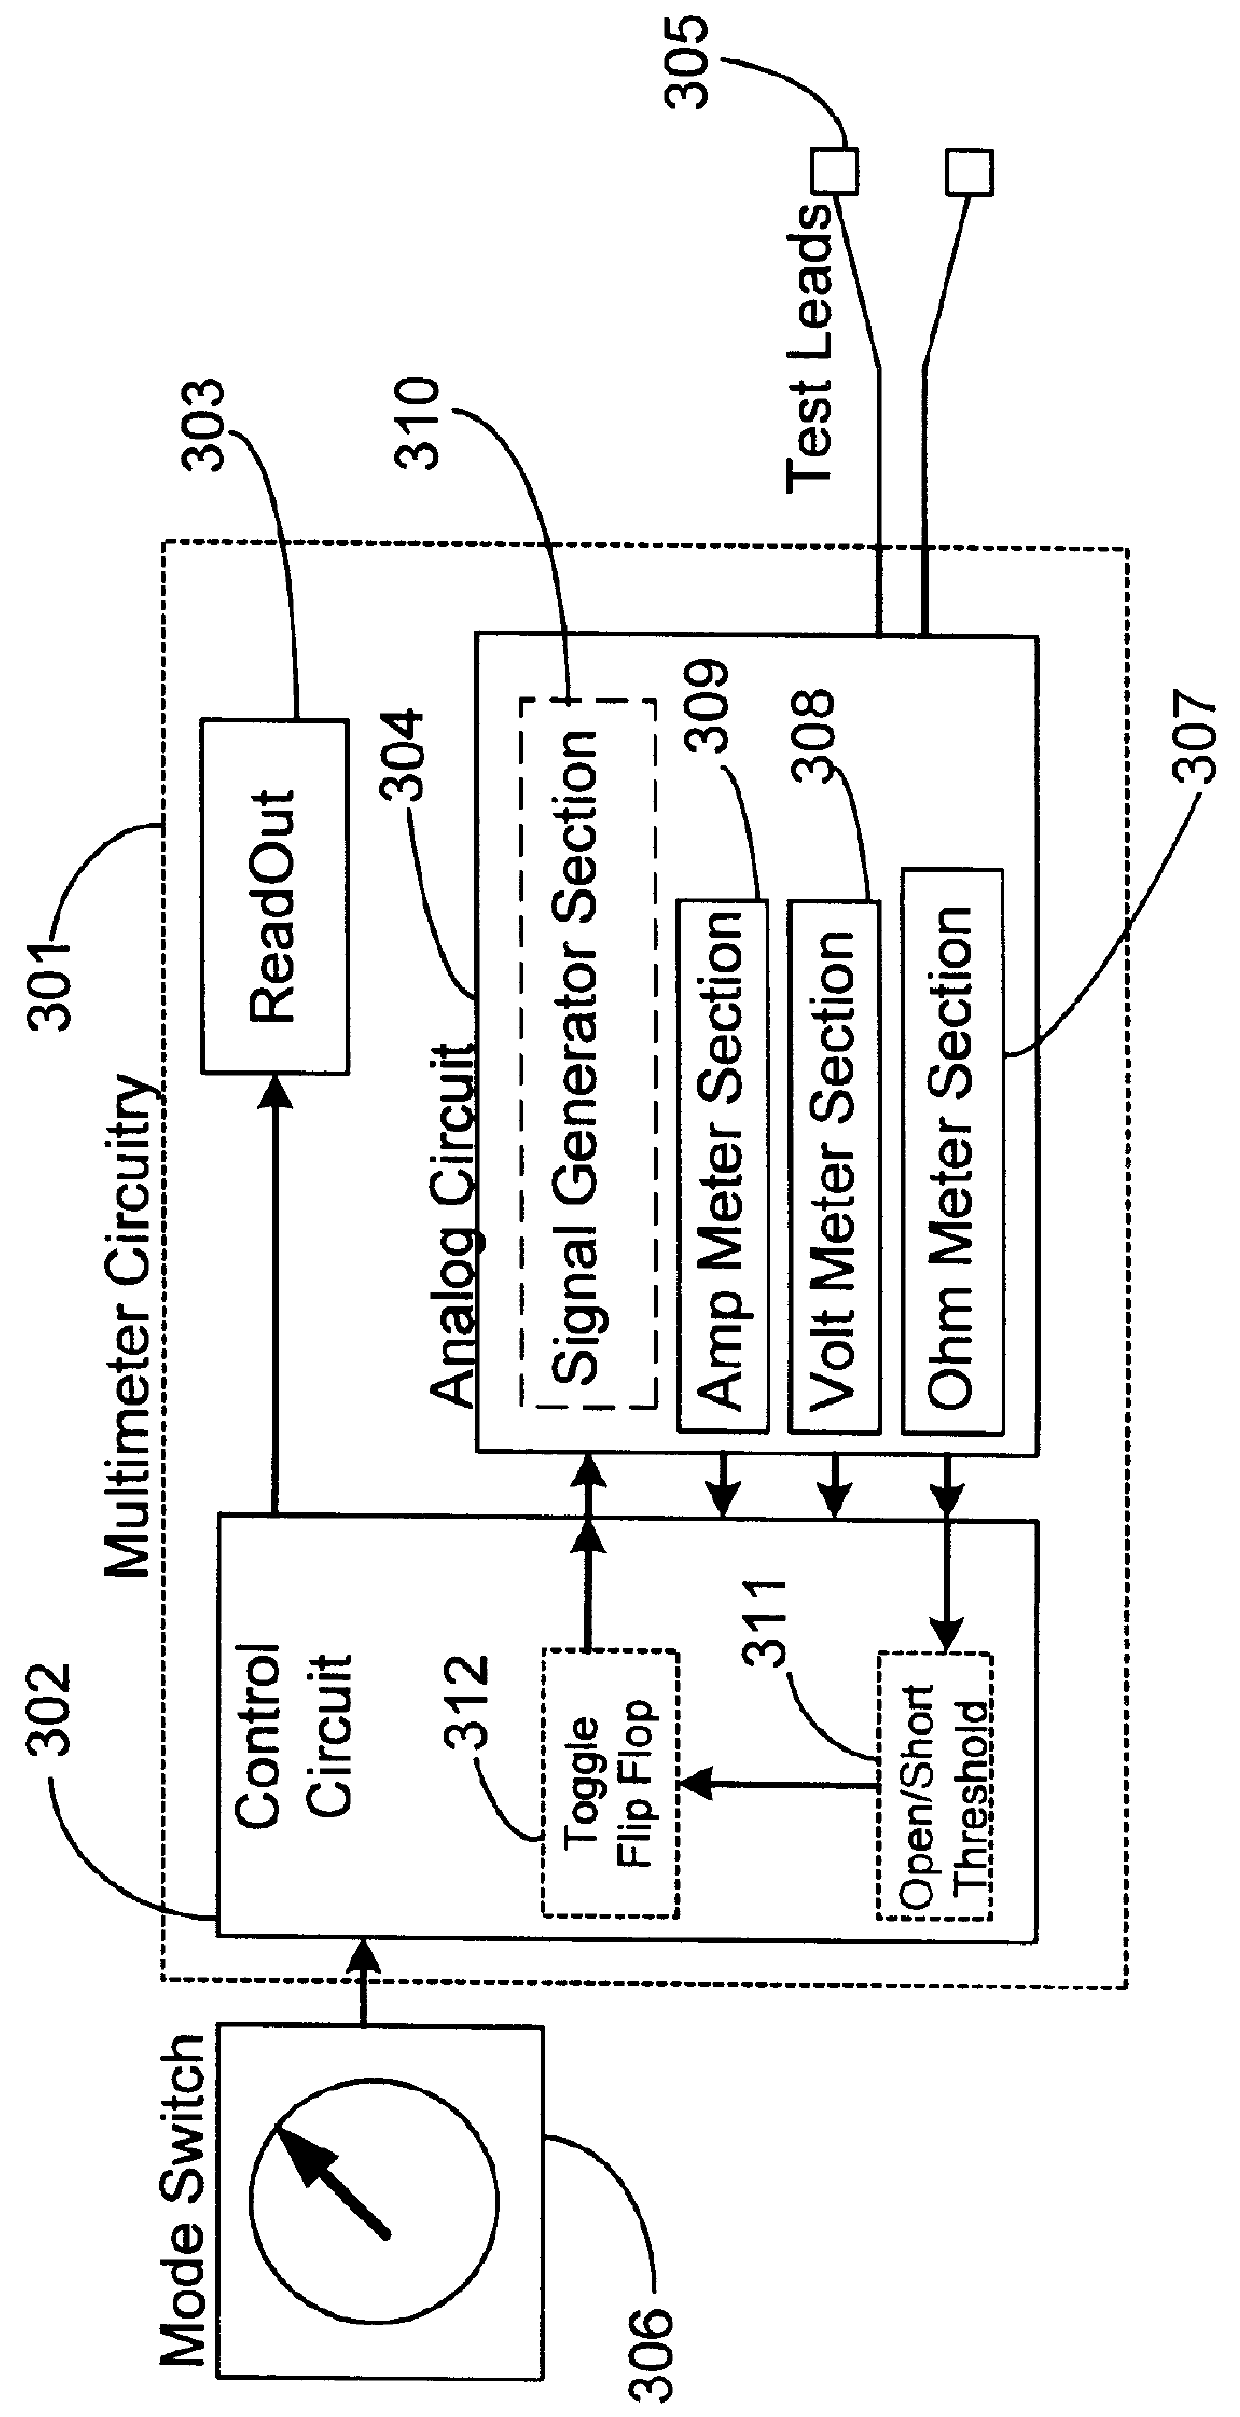 Method and apparatus for remotely changing signal characteristics of a signal generator